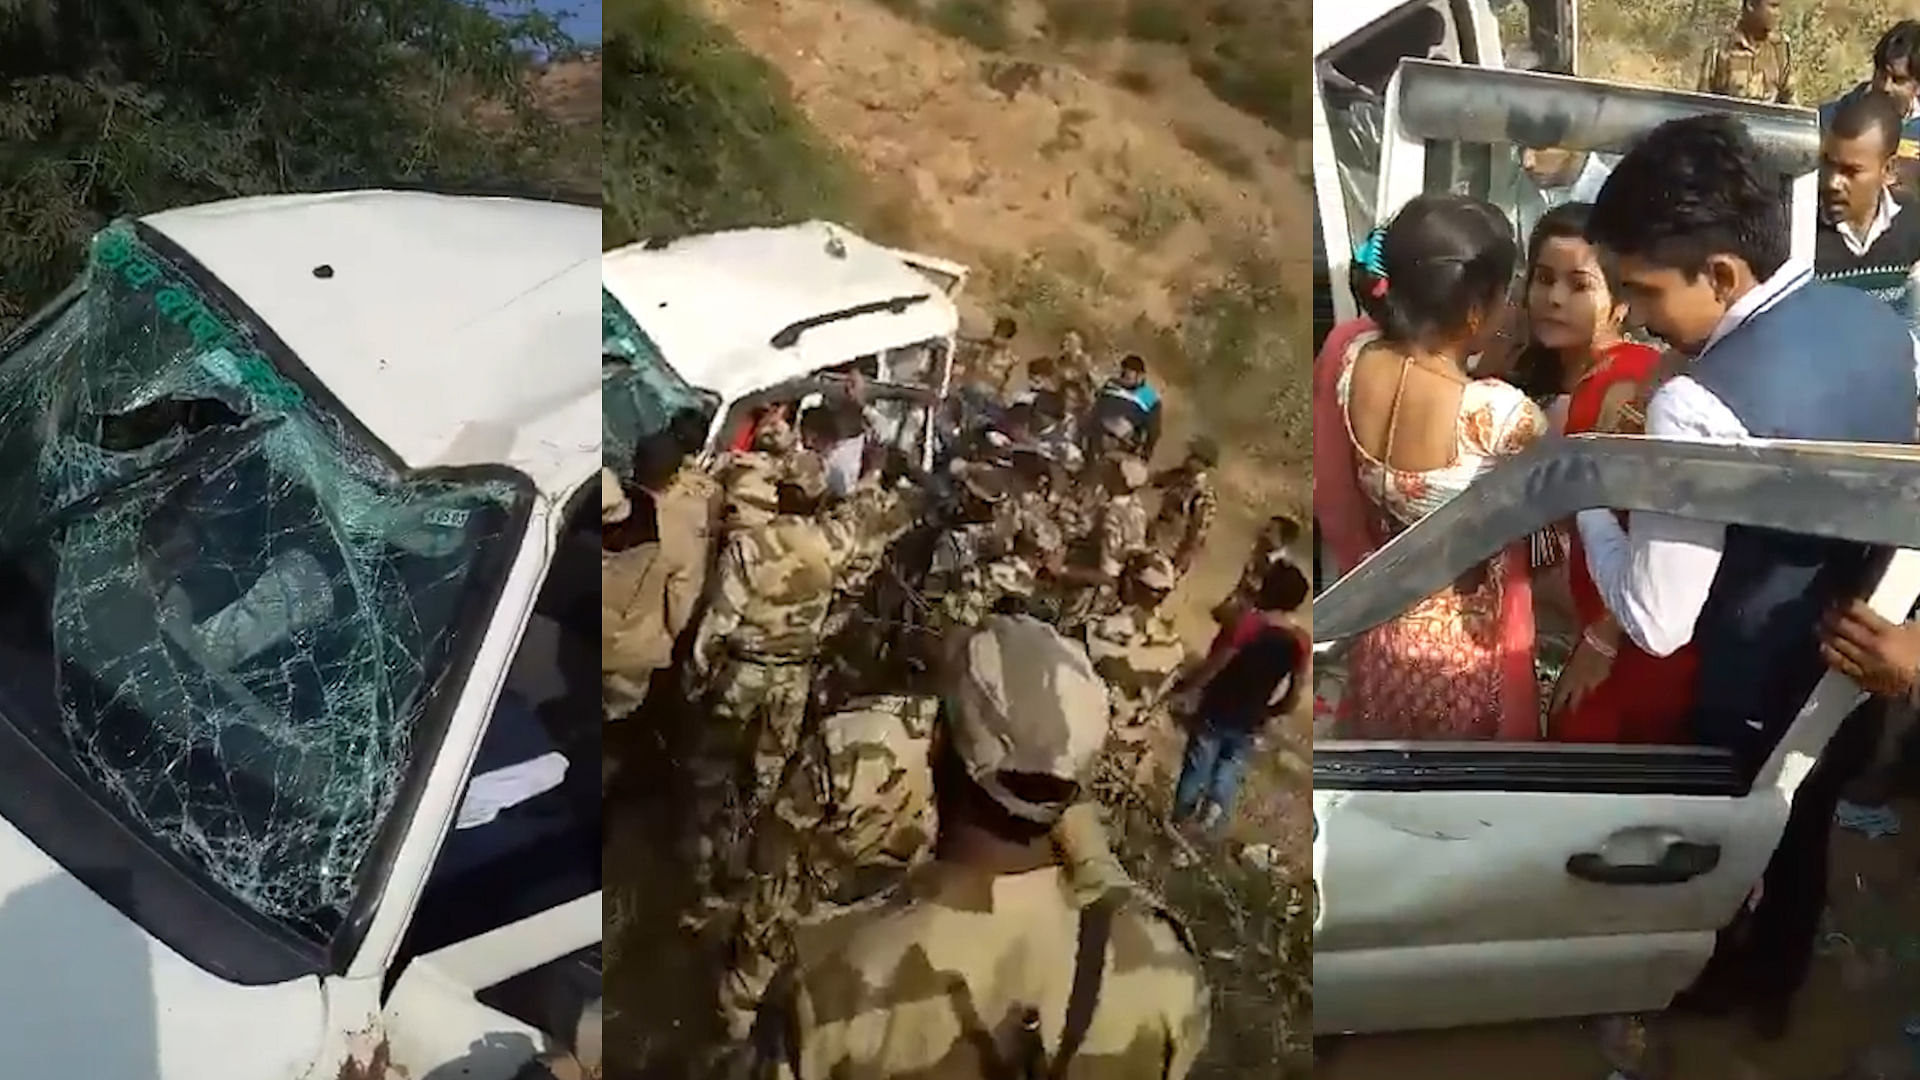 CISF personnel rescued six people trapped in a car n Rajasthan’s Behror&nbsp;